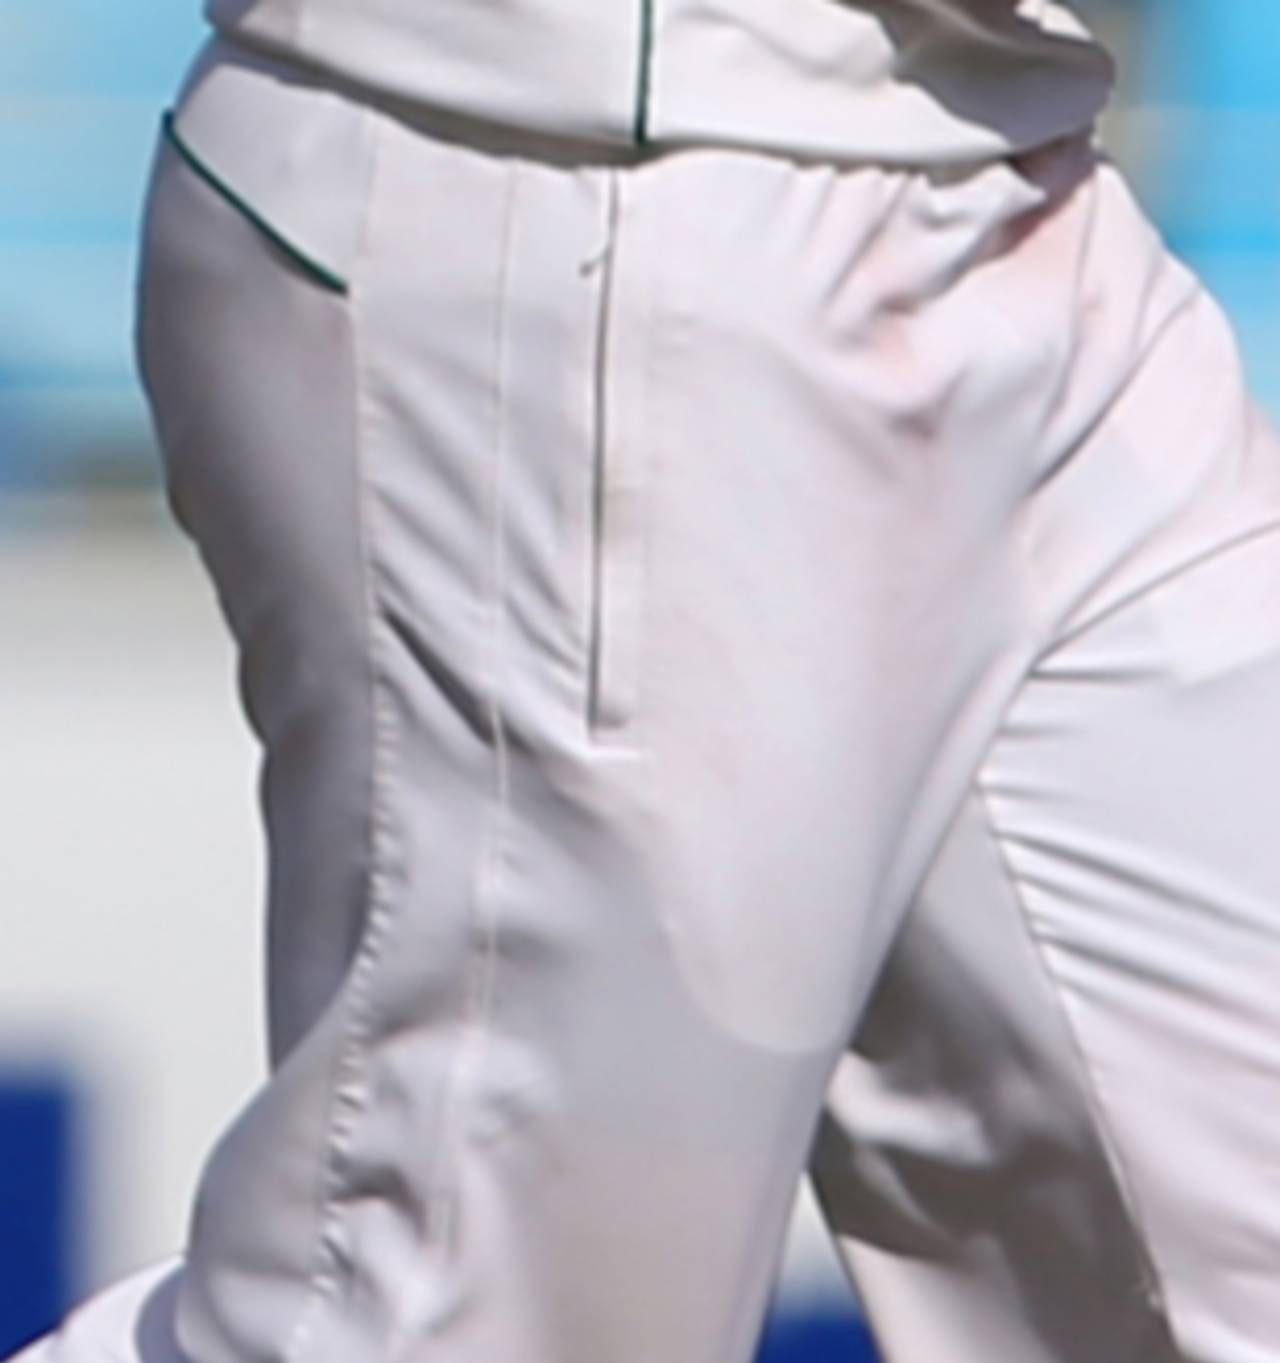 By 2015, zips will not be allowed on cricket trousers, Pakistan v South Africa, 2nd Test, Dubai, 4th day, October 26, 2013